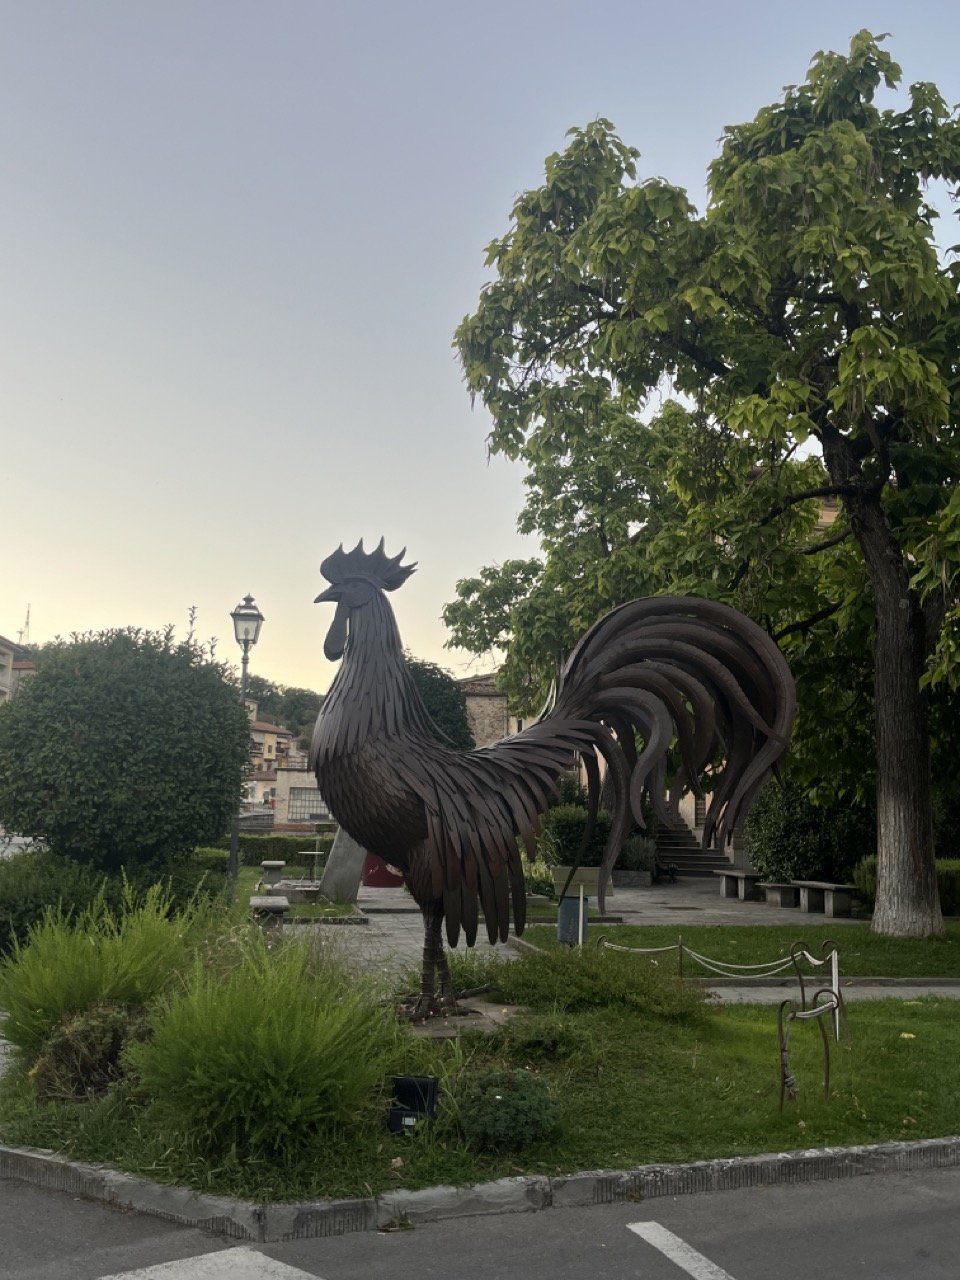 A close up view of a giant bronze rooster statue in a park in Gaiole in Chianti.